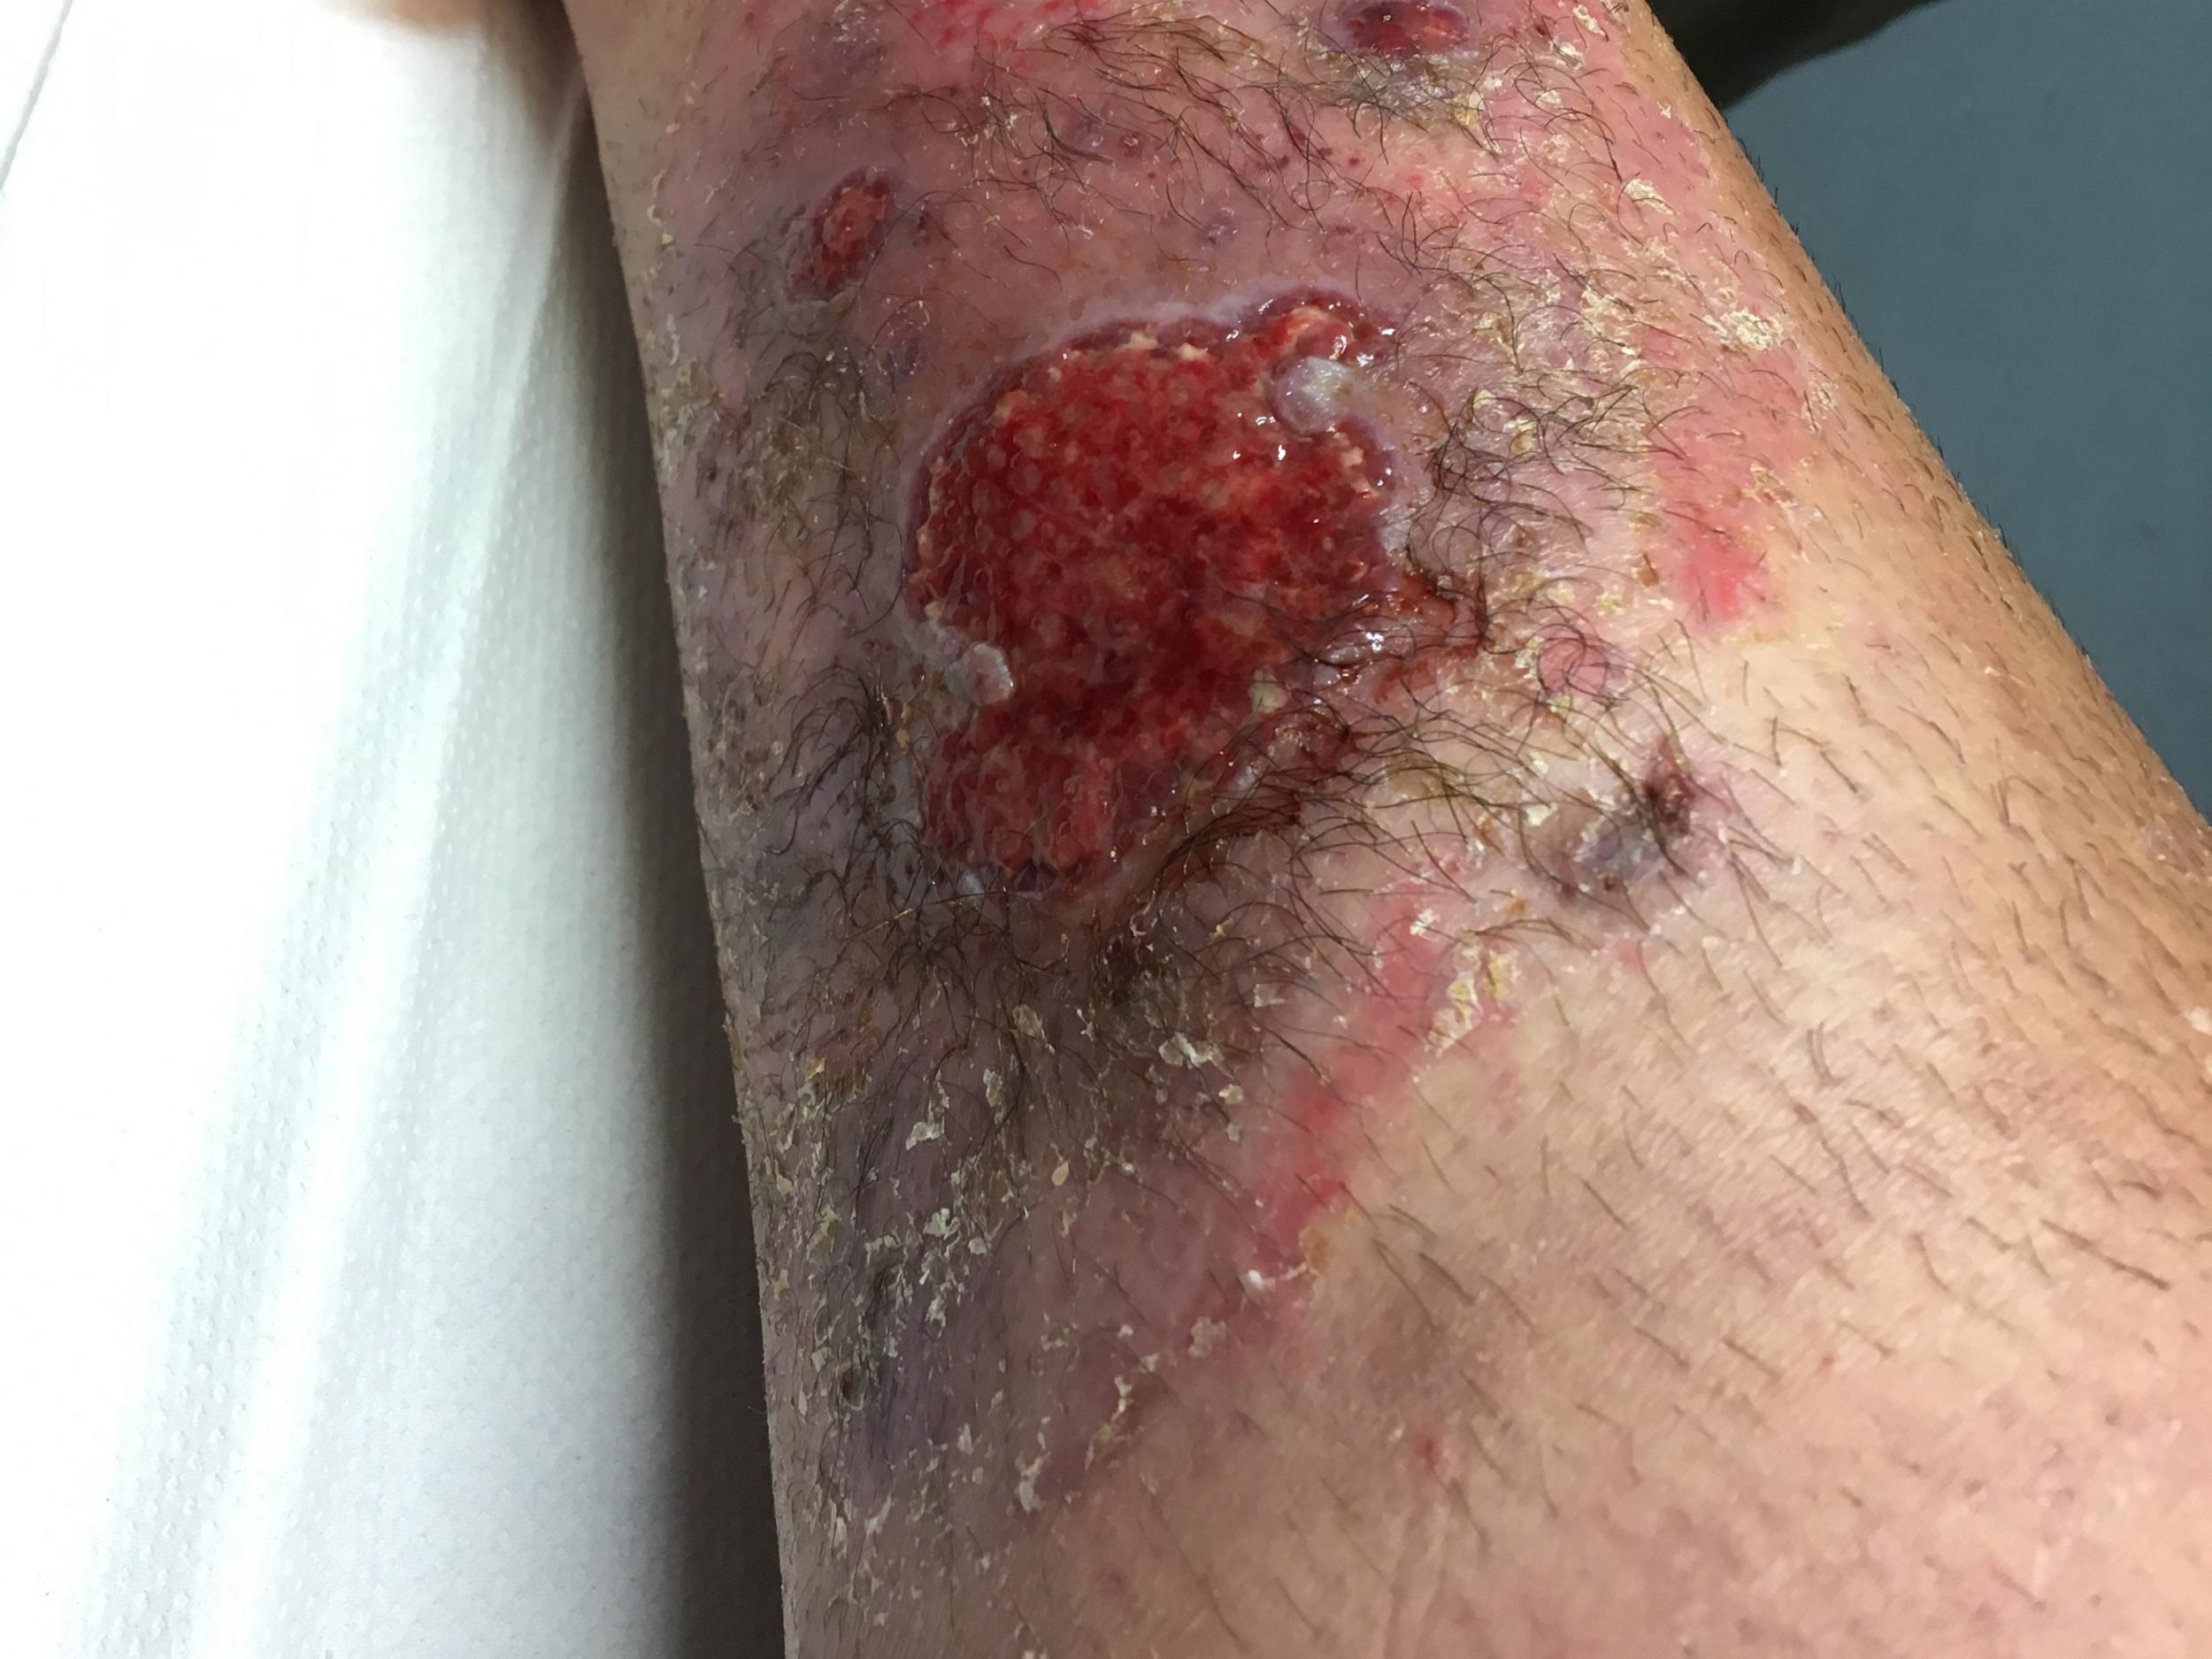 Mysterious spider bite leaves woman unable to walk and still